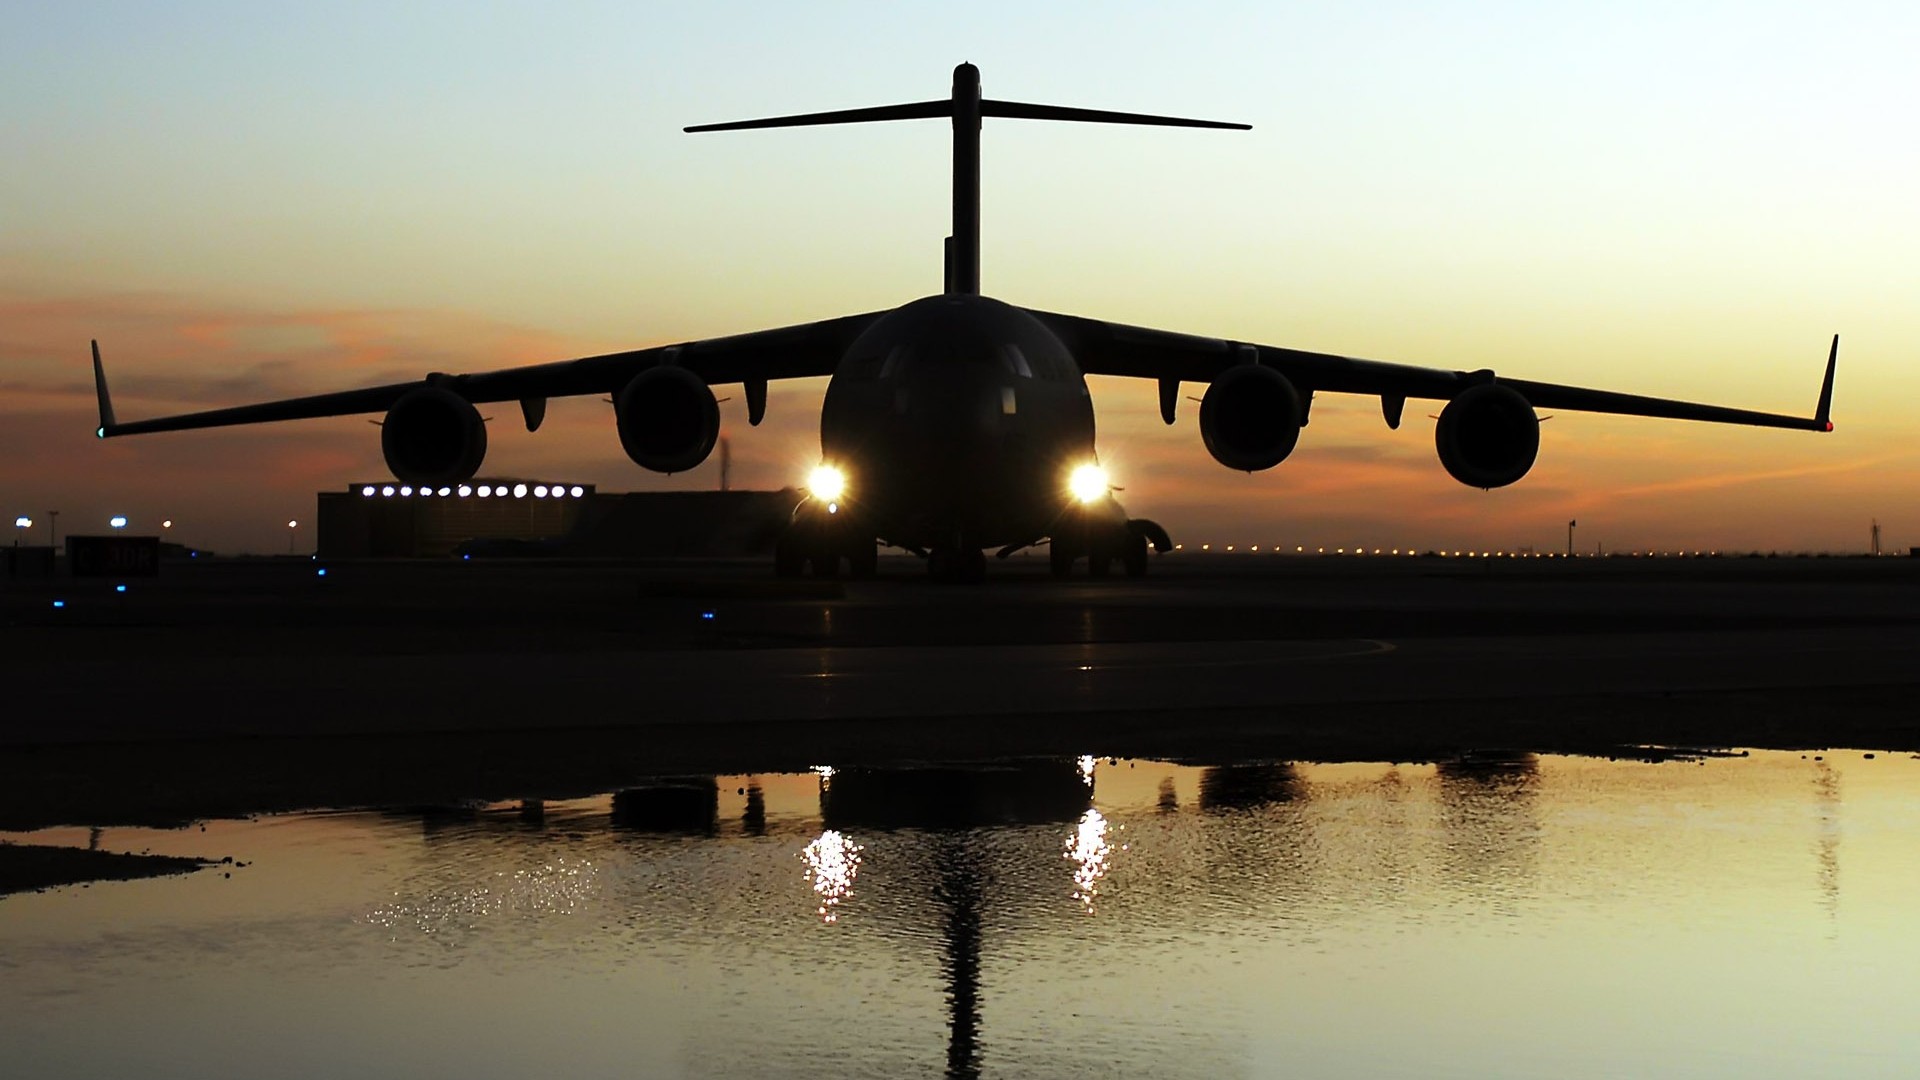 Military Aircraft Airplane Jets C 17 Globmaster Silhouette Aircraft Military 1920x1080